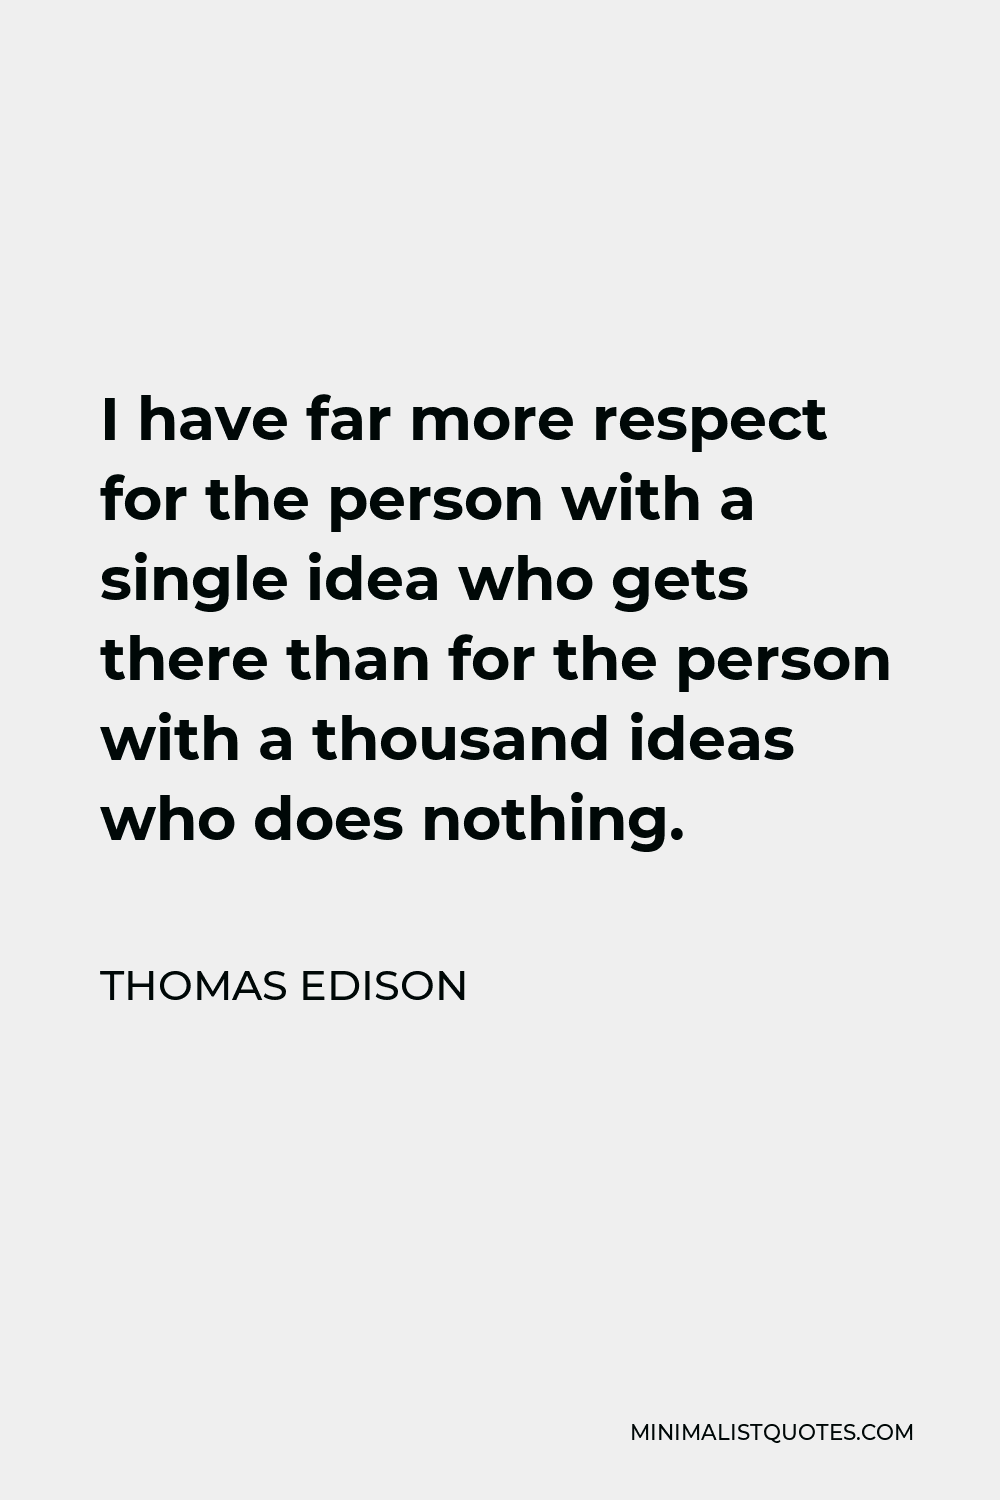 Thomas Edison Quote - I have far more respect for the person with a single idea who gets there than for the person with a thousand ideas who does nothing.